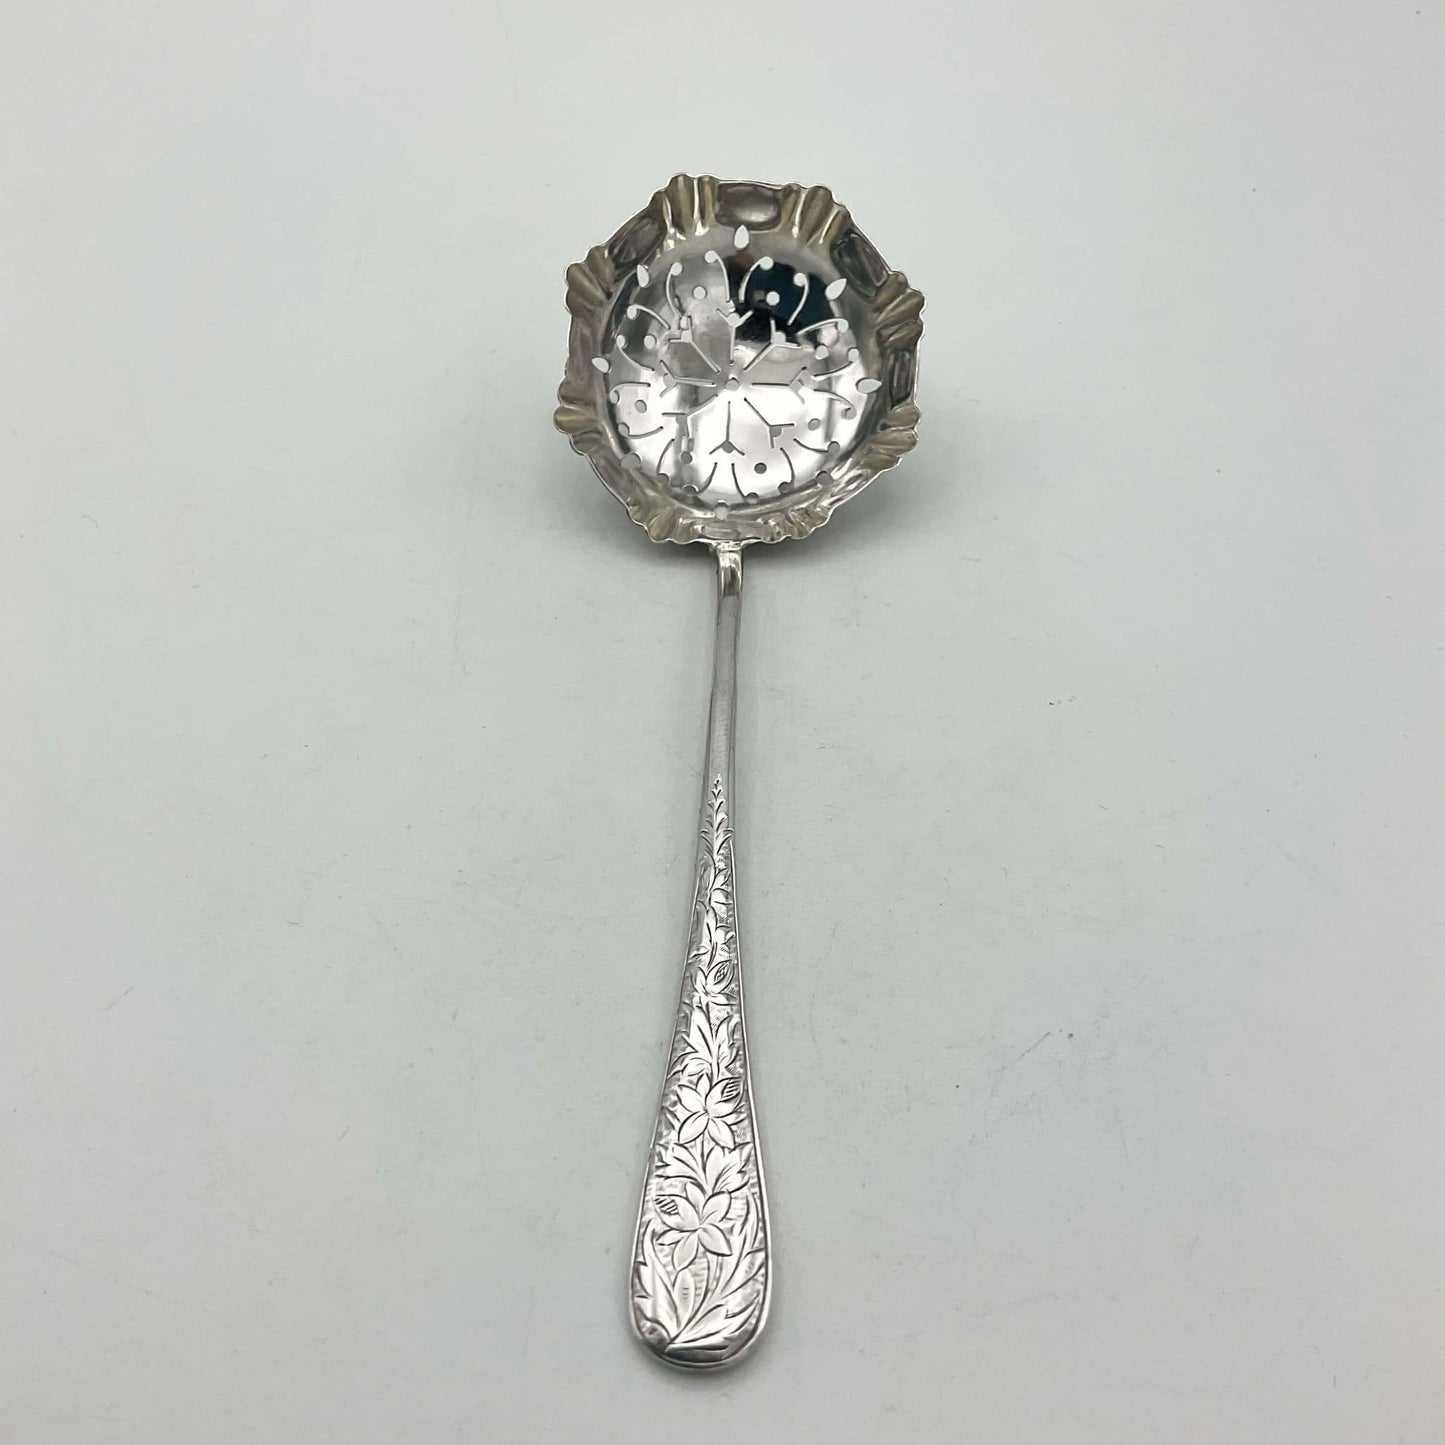 Antique Silver Sifter Spoon with flowers on the handle on white background And hexagonal bowl